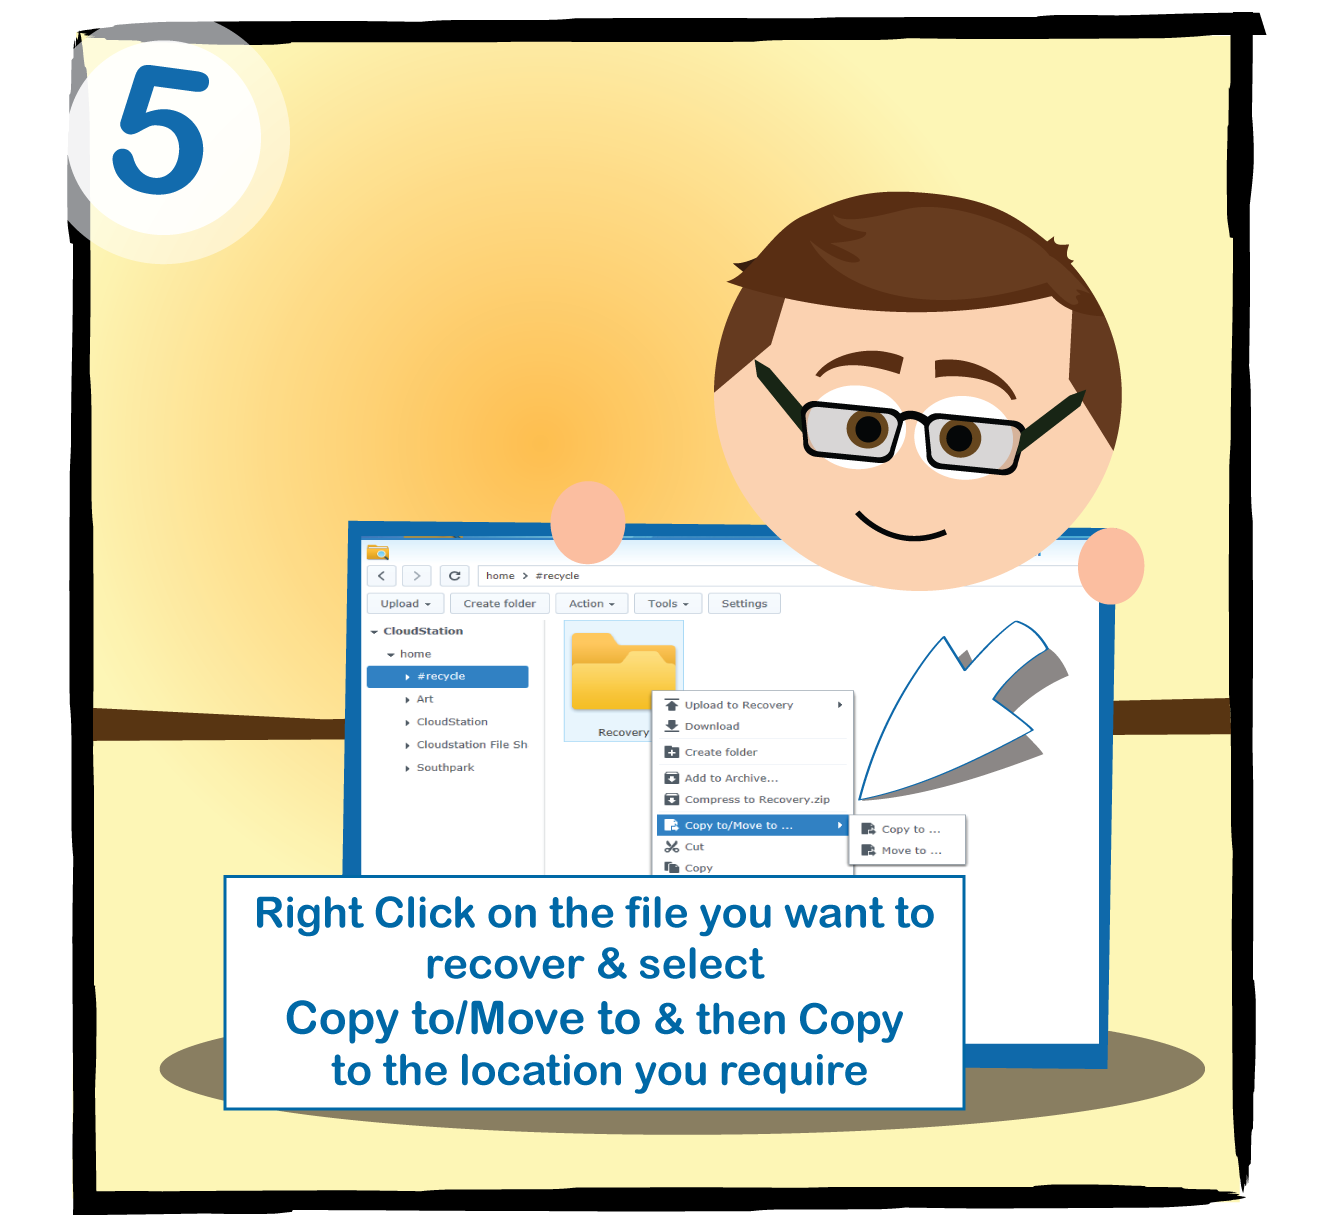 Right Click on the file you want to recover & select Copy to/Move to & then Copy to the location you require